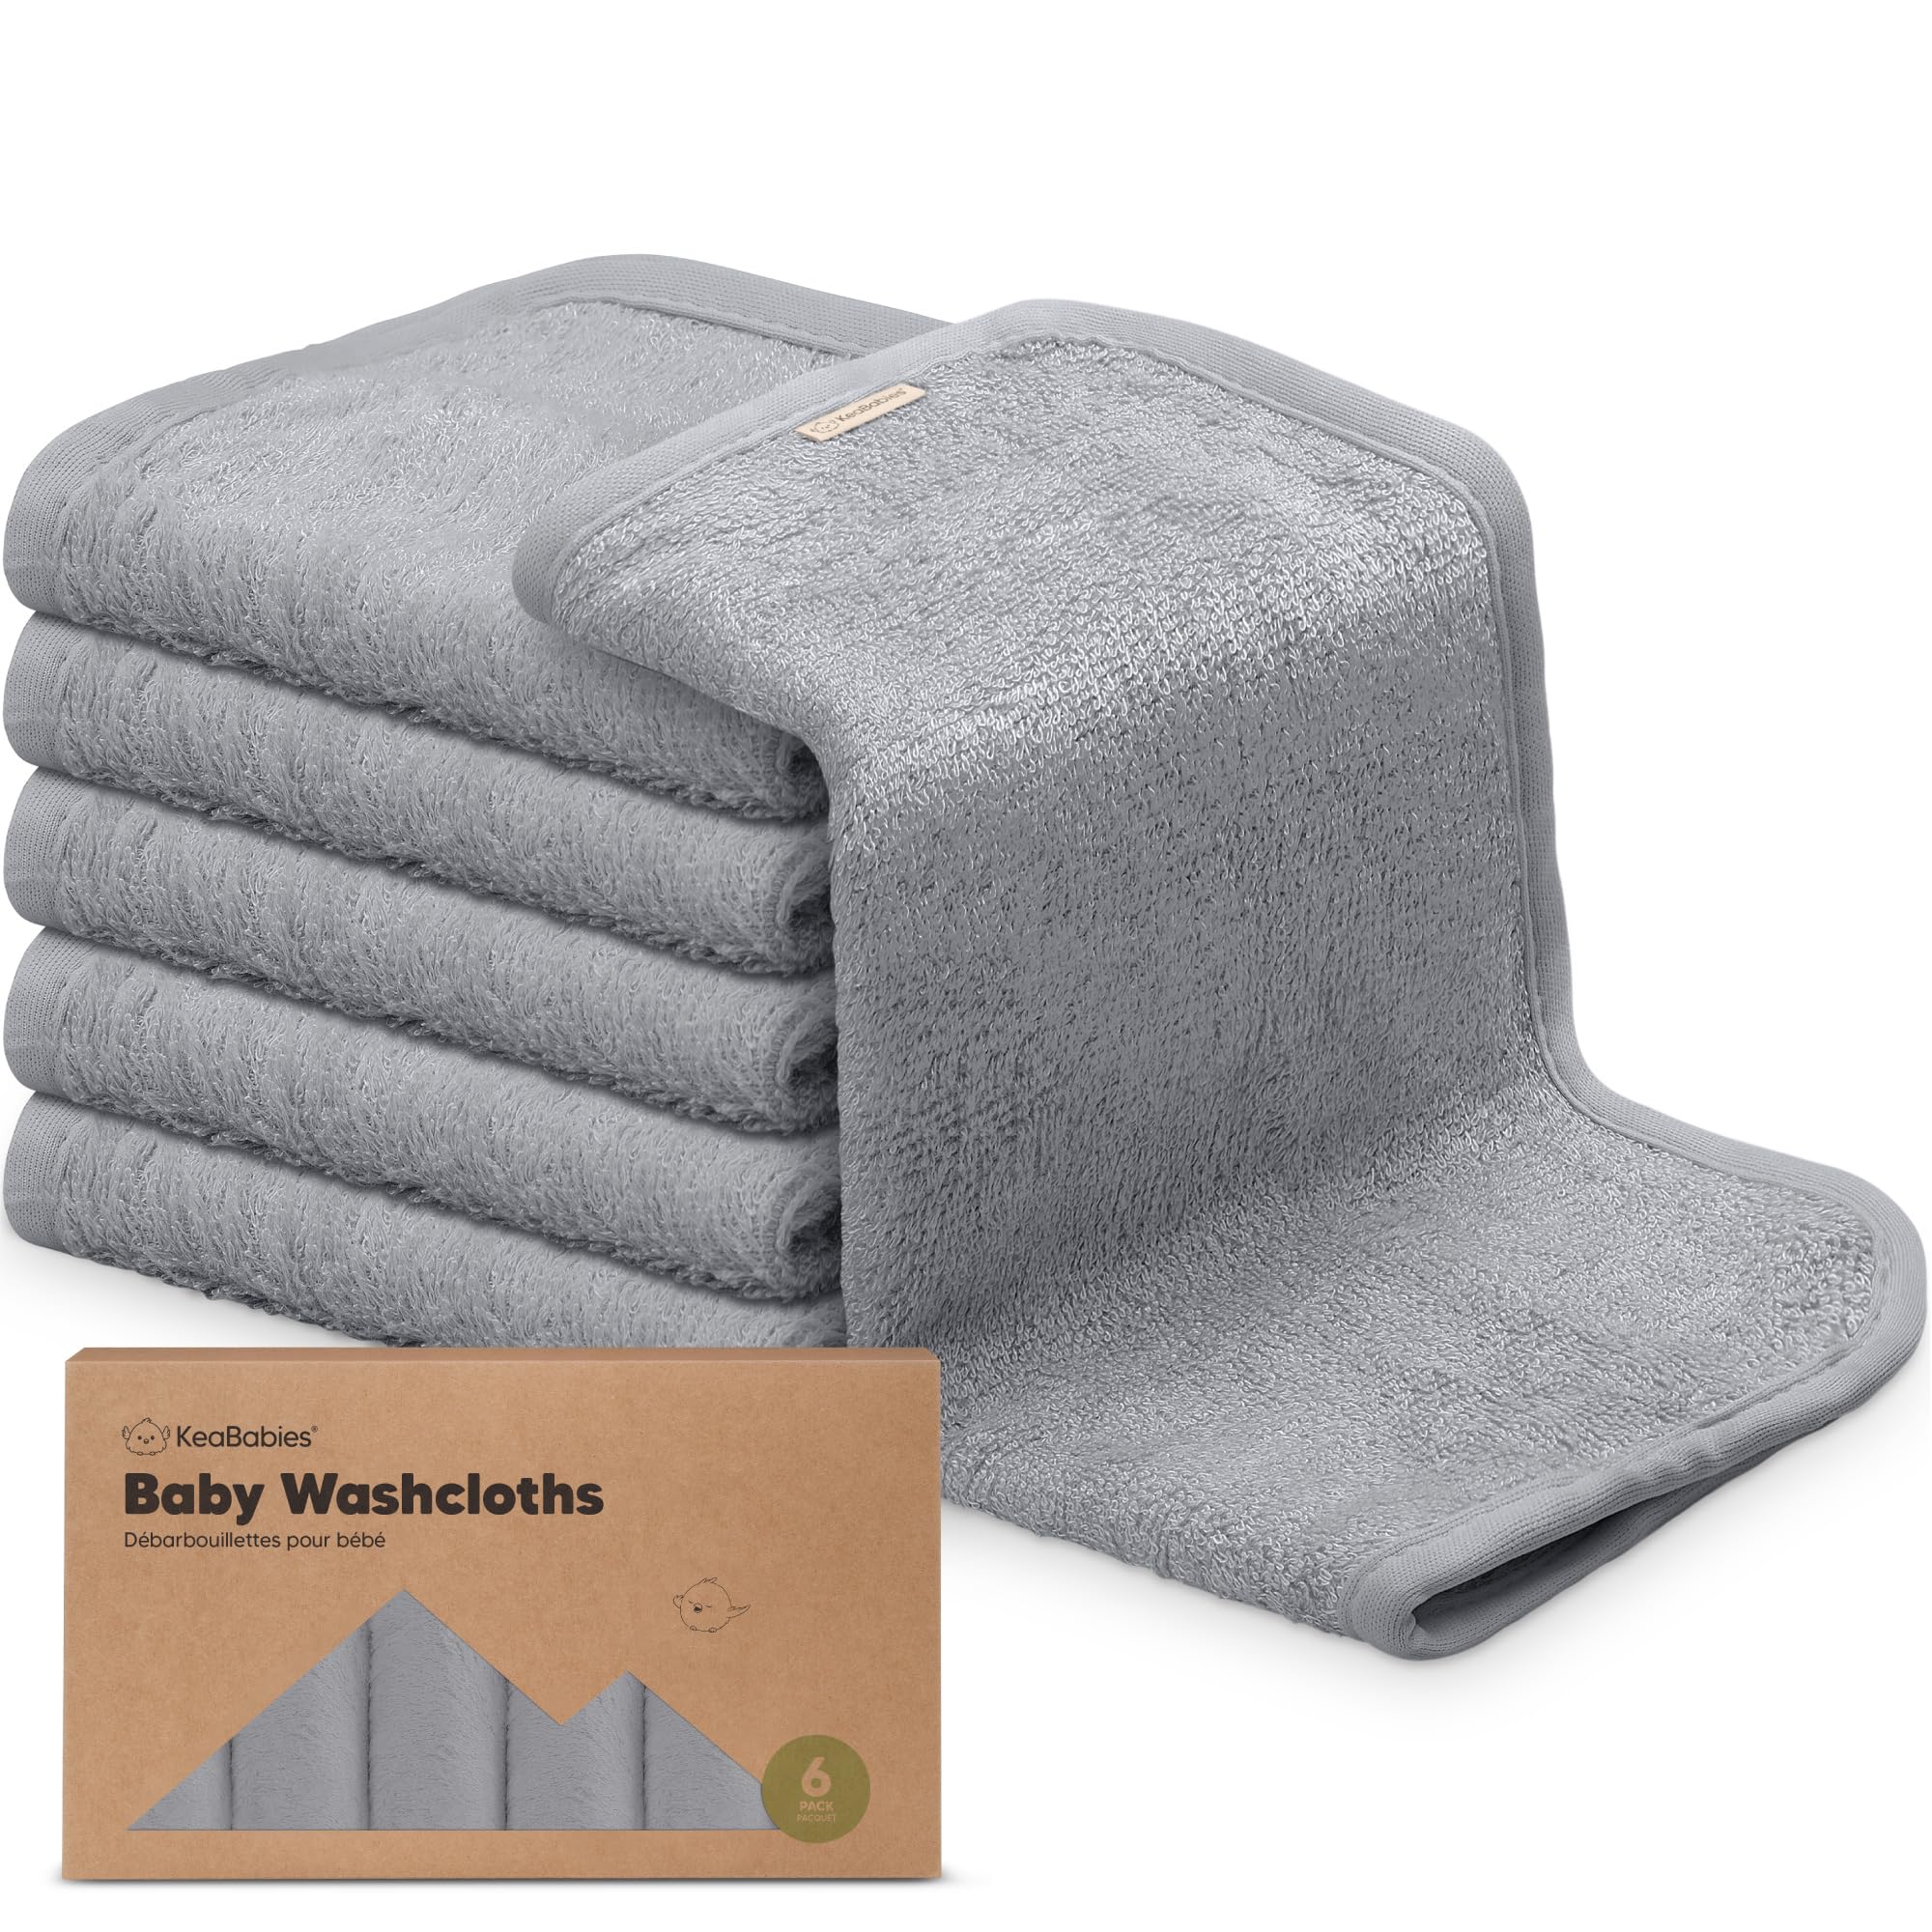 6-Pack Organic Baby Washcloths - Soft Viscose from Bamboo Washcloth, Baby Wash Cloths, Baby Wash Cloth for Newborn, Kids, Bath Baby Towels, Face Towel, Face Cloths for Washing Face (Cool Gray)